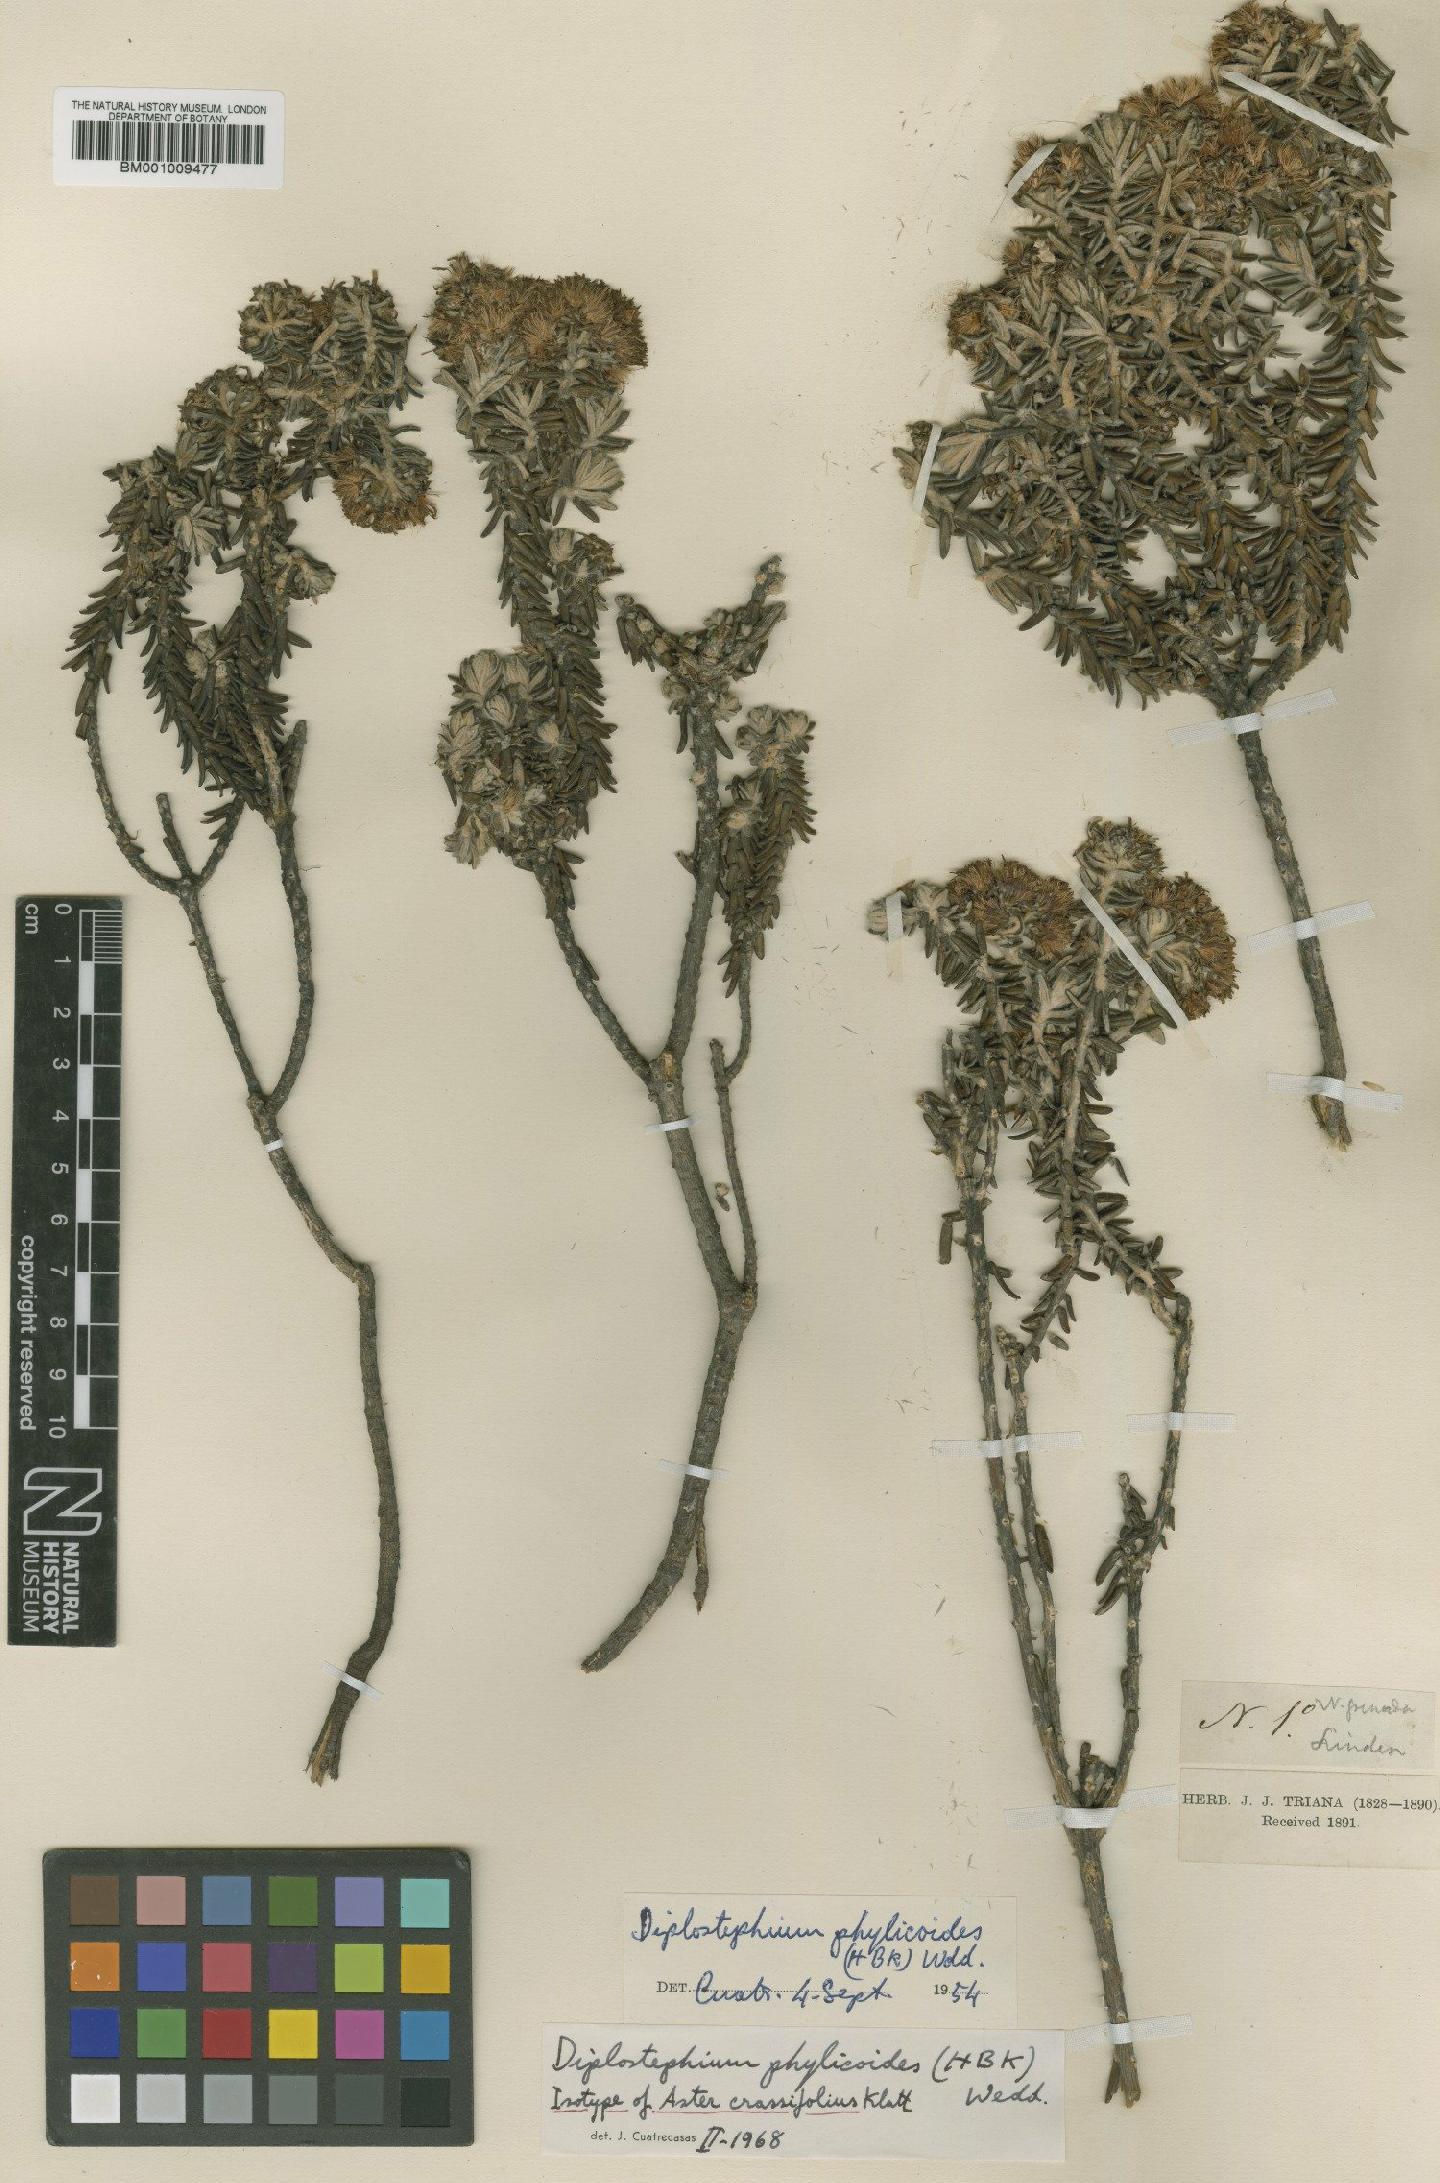 To NHMUK collection (Diplostephium phylicoides (Kunth) Wedd.; Isotype; NHMUK:ecatalogue:611135)